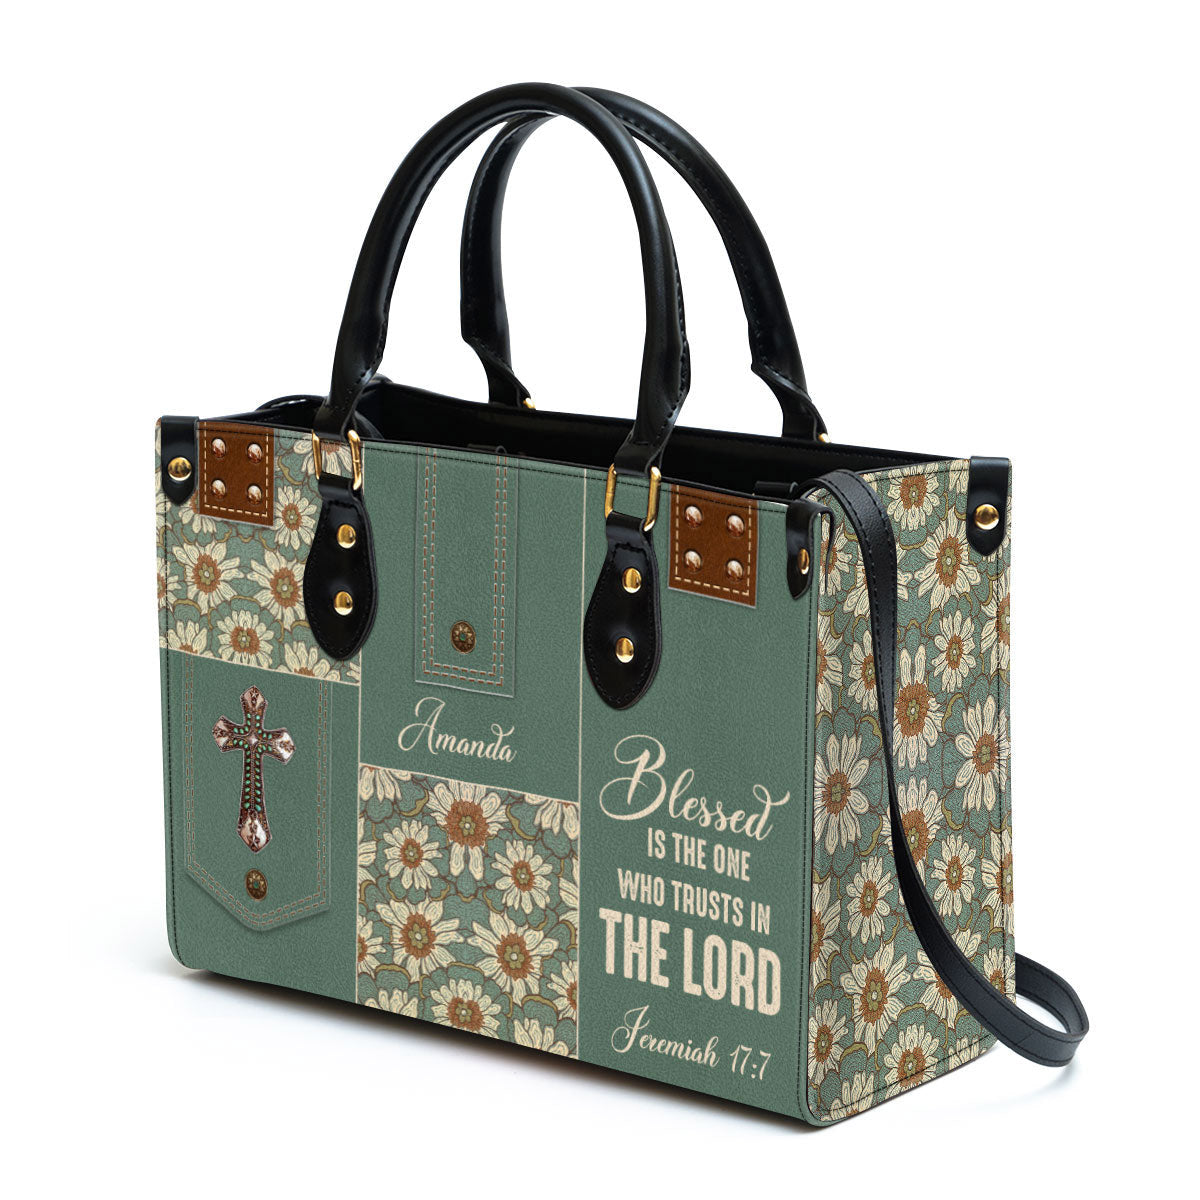 Blessed Is The One Who Trusts In The Lord Leather Bag - Custom Name Flower Leather Handbag - Christian Gifts For Women